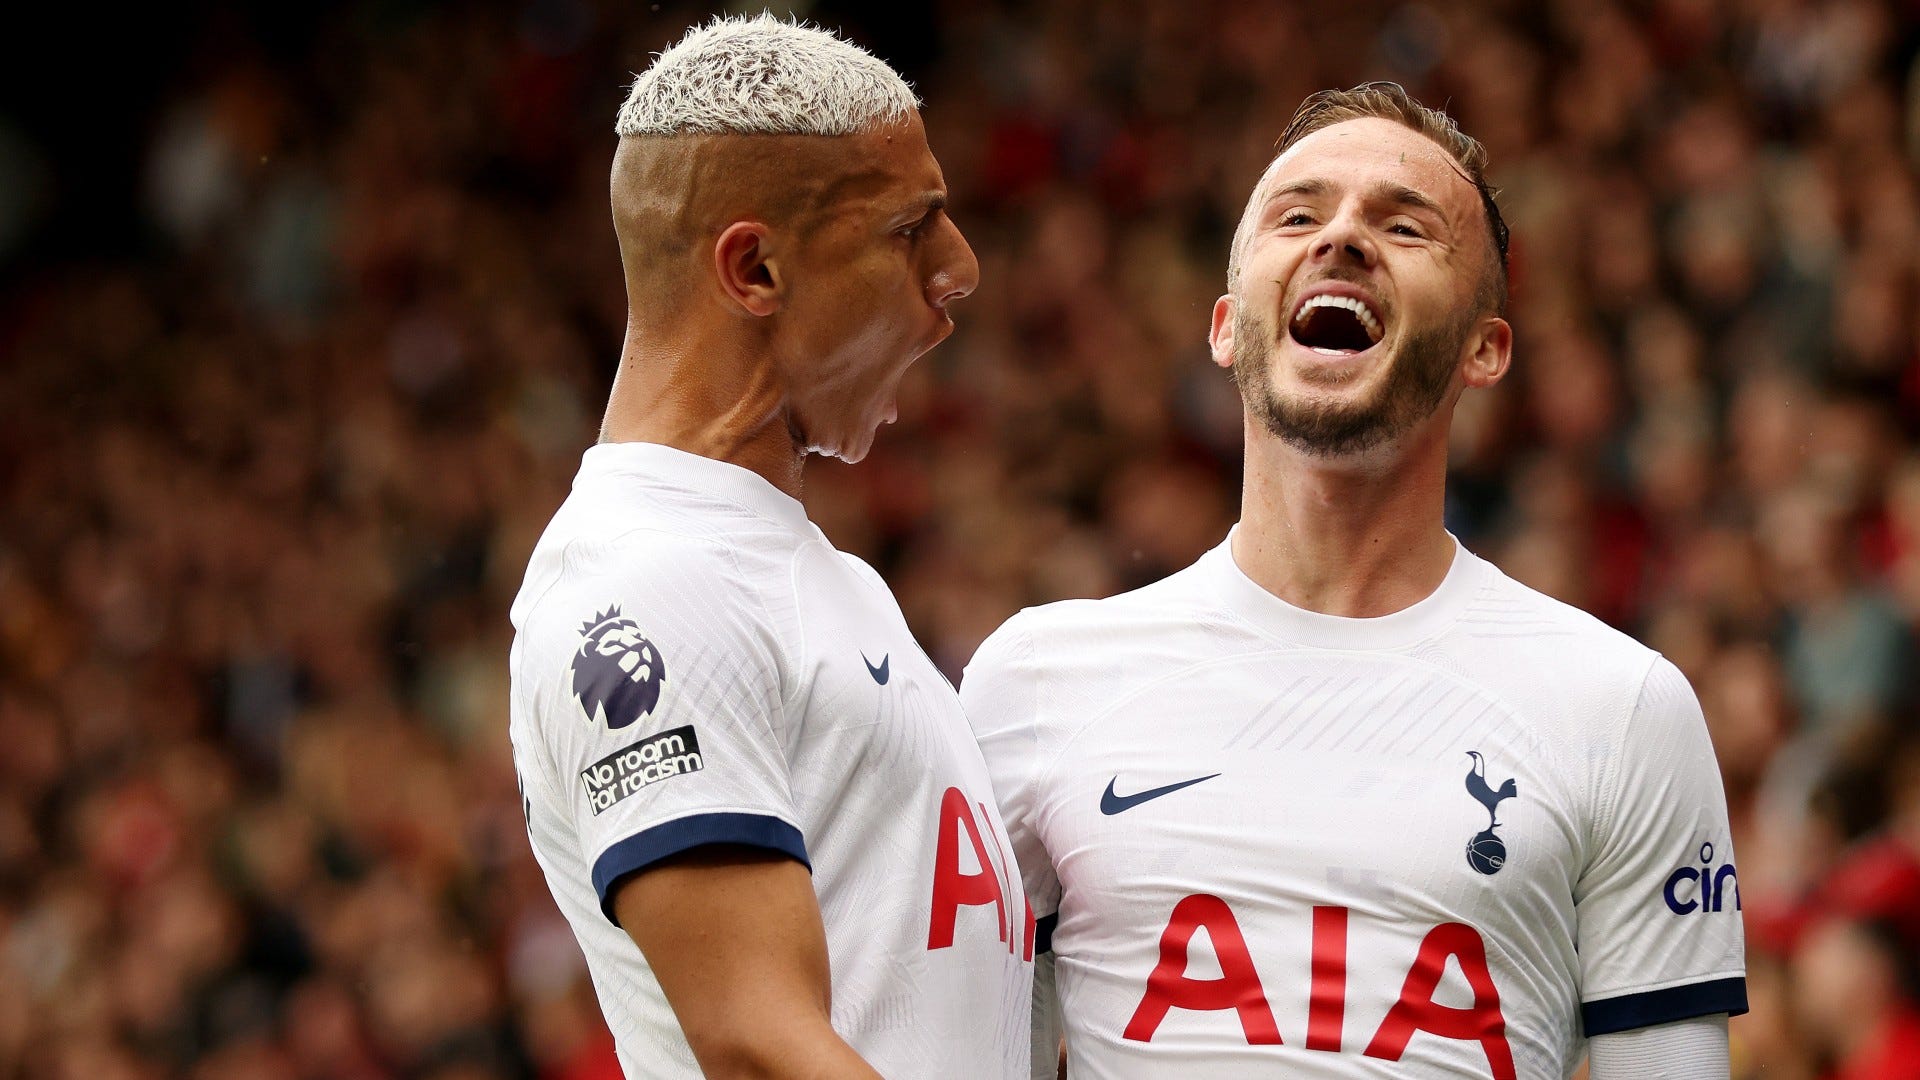 Tottenham vs Sheff Utd Where to watch the match online, live stream, TV channels, and kick-off time Goal UK